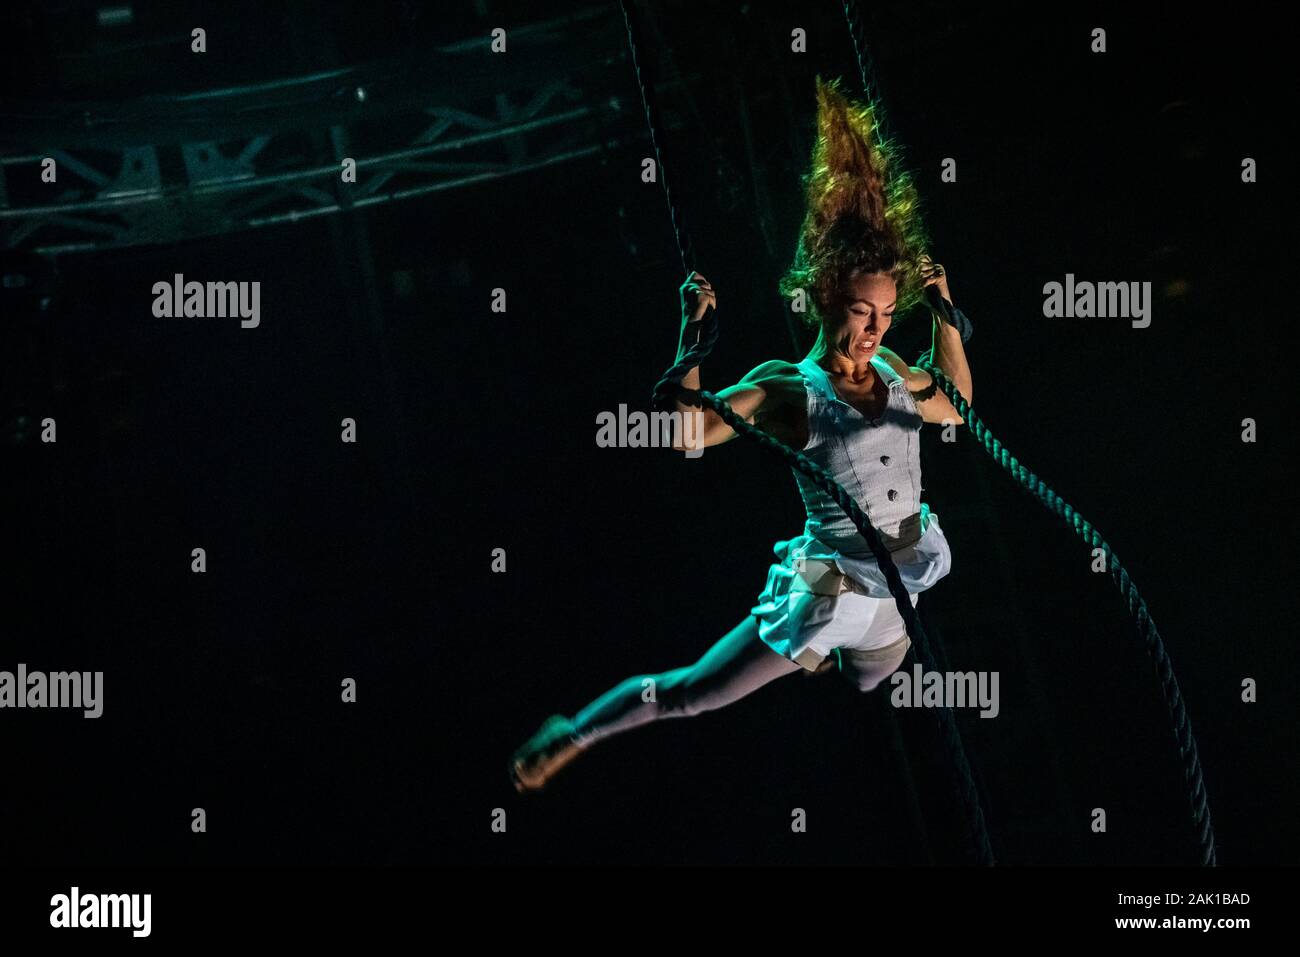 NoFit State Circus performs their new show “Lexicon” at the Roundhouse venue in north London, UK. Stock Photo